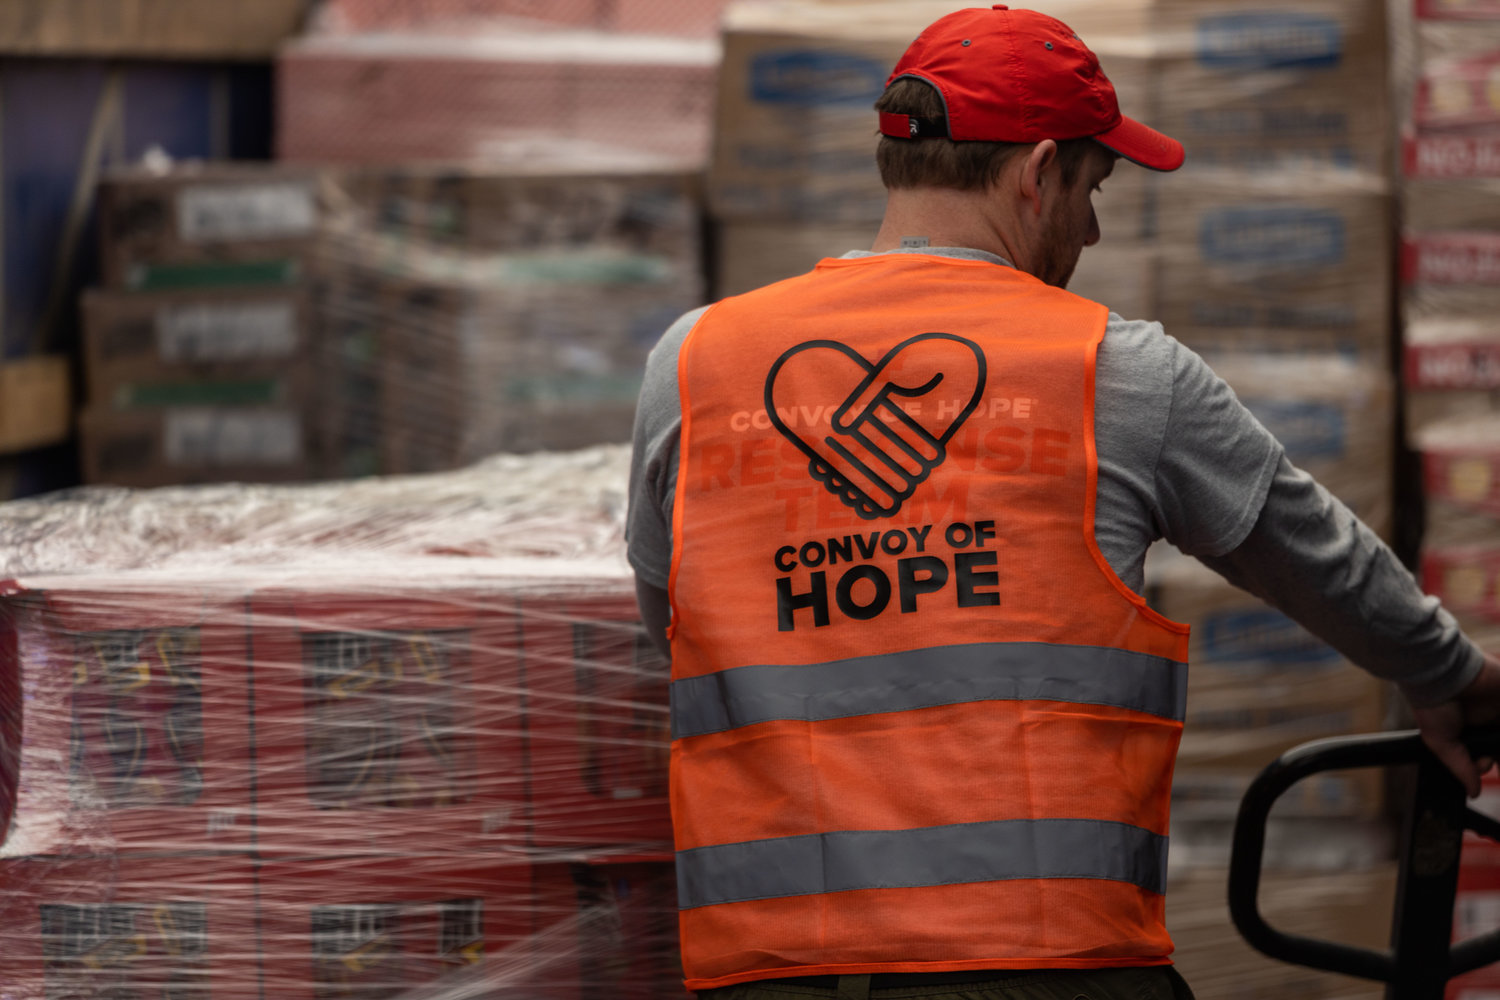 Convoy of Hope has a goal of distributing 50 million meals to Ukrainians impacted by the invasion.